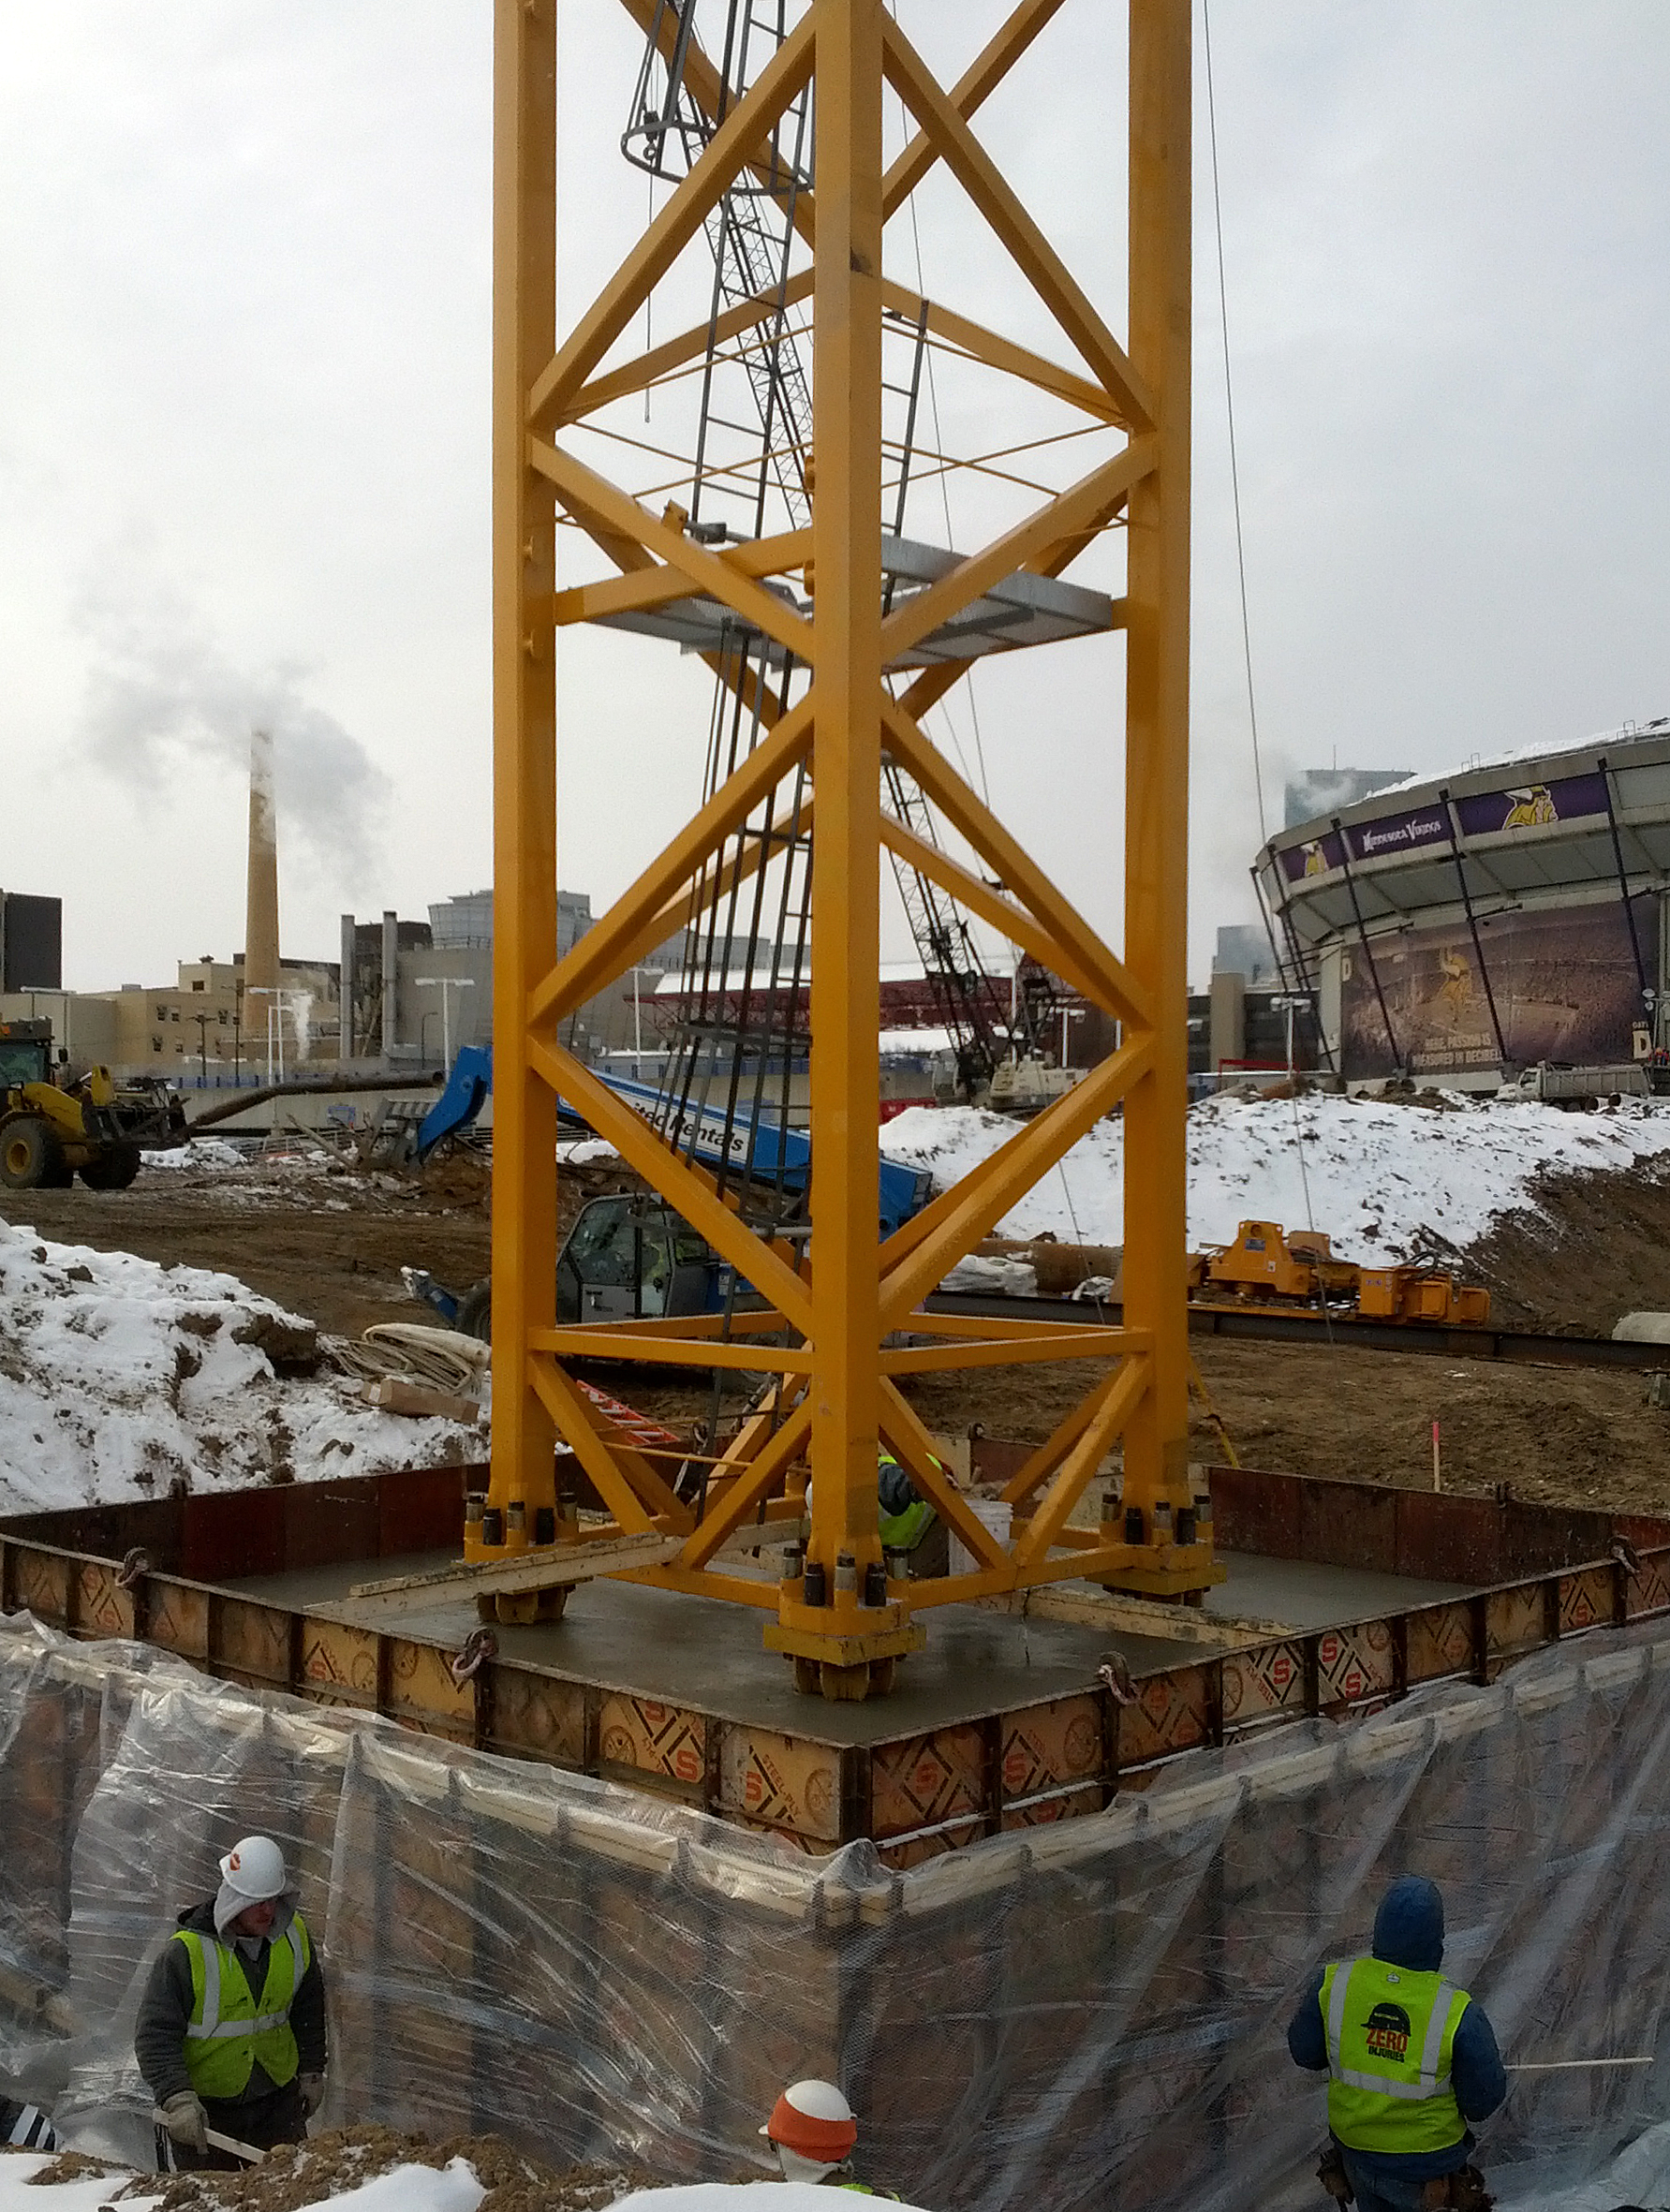 Movin' on up: workers to install tower crane at Vikings stadium site ...